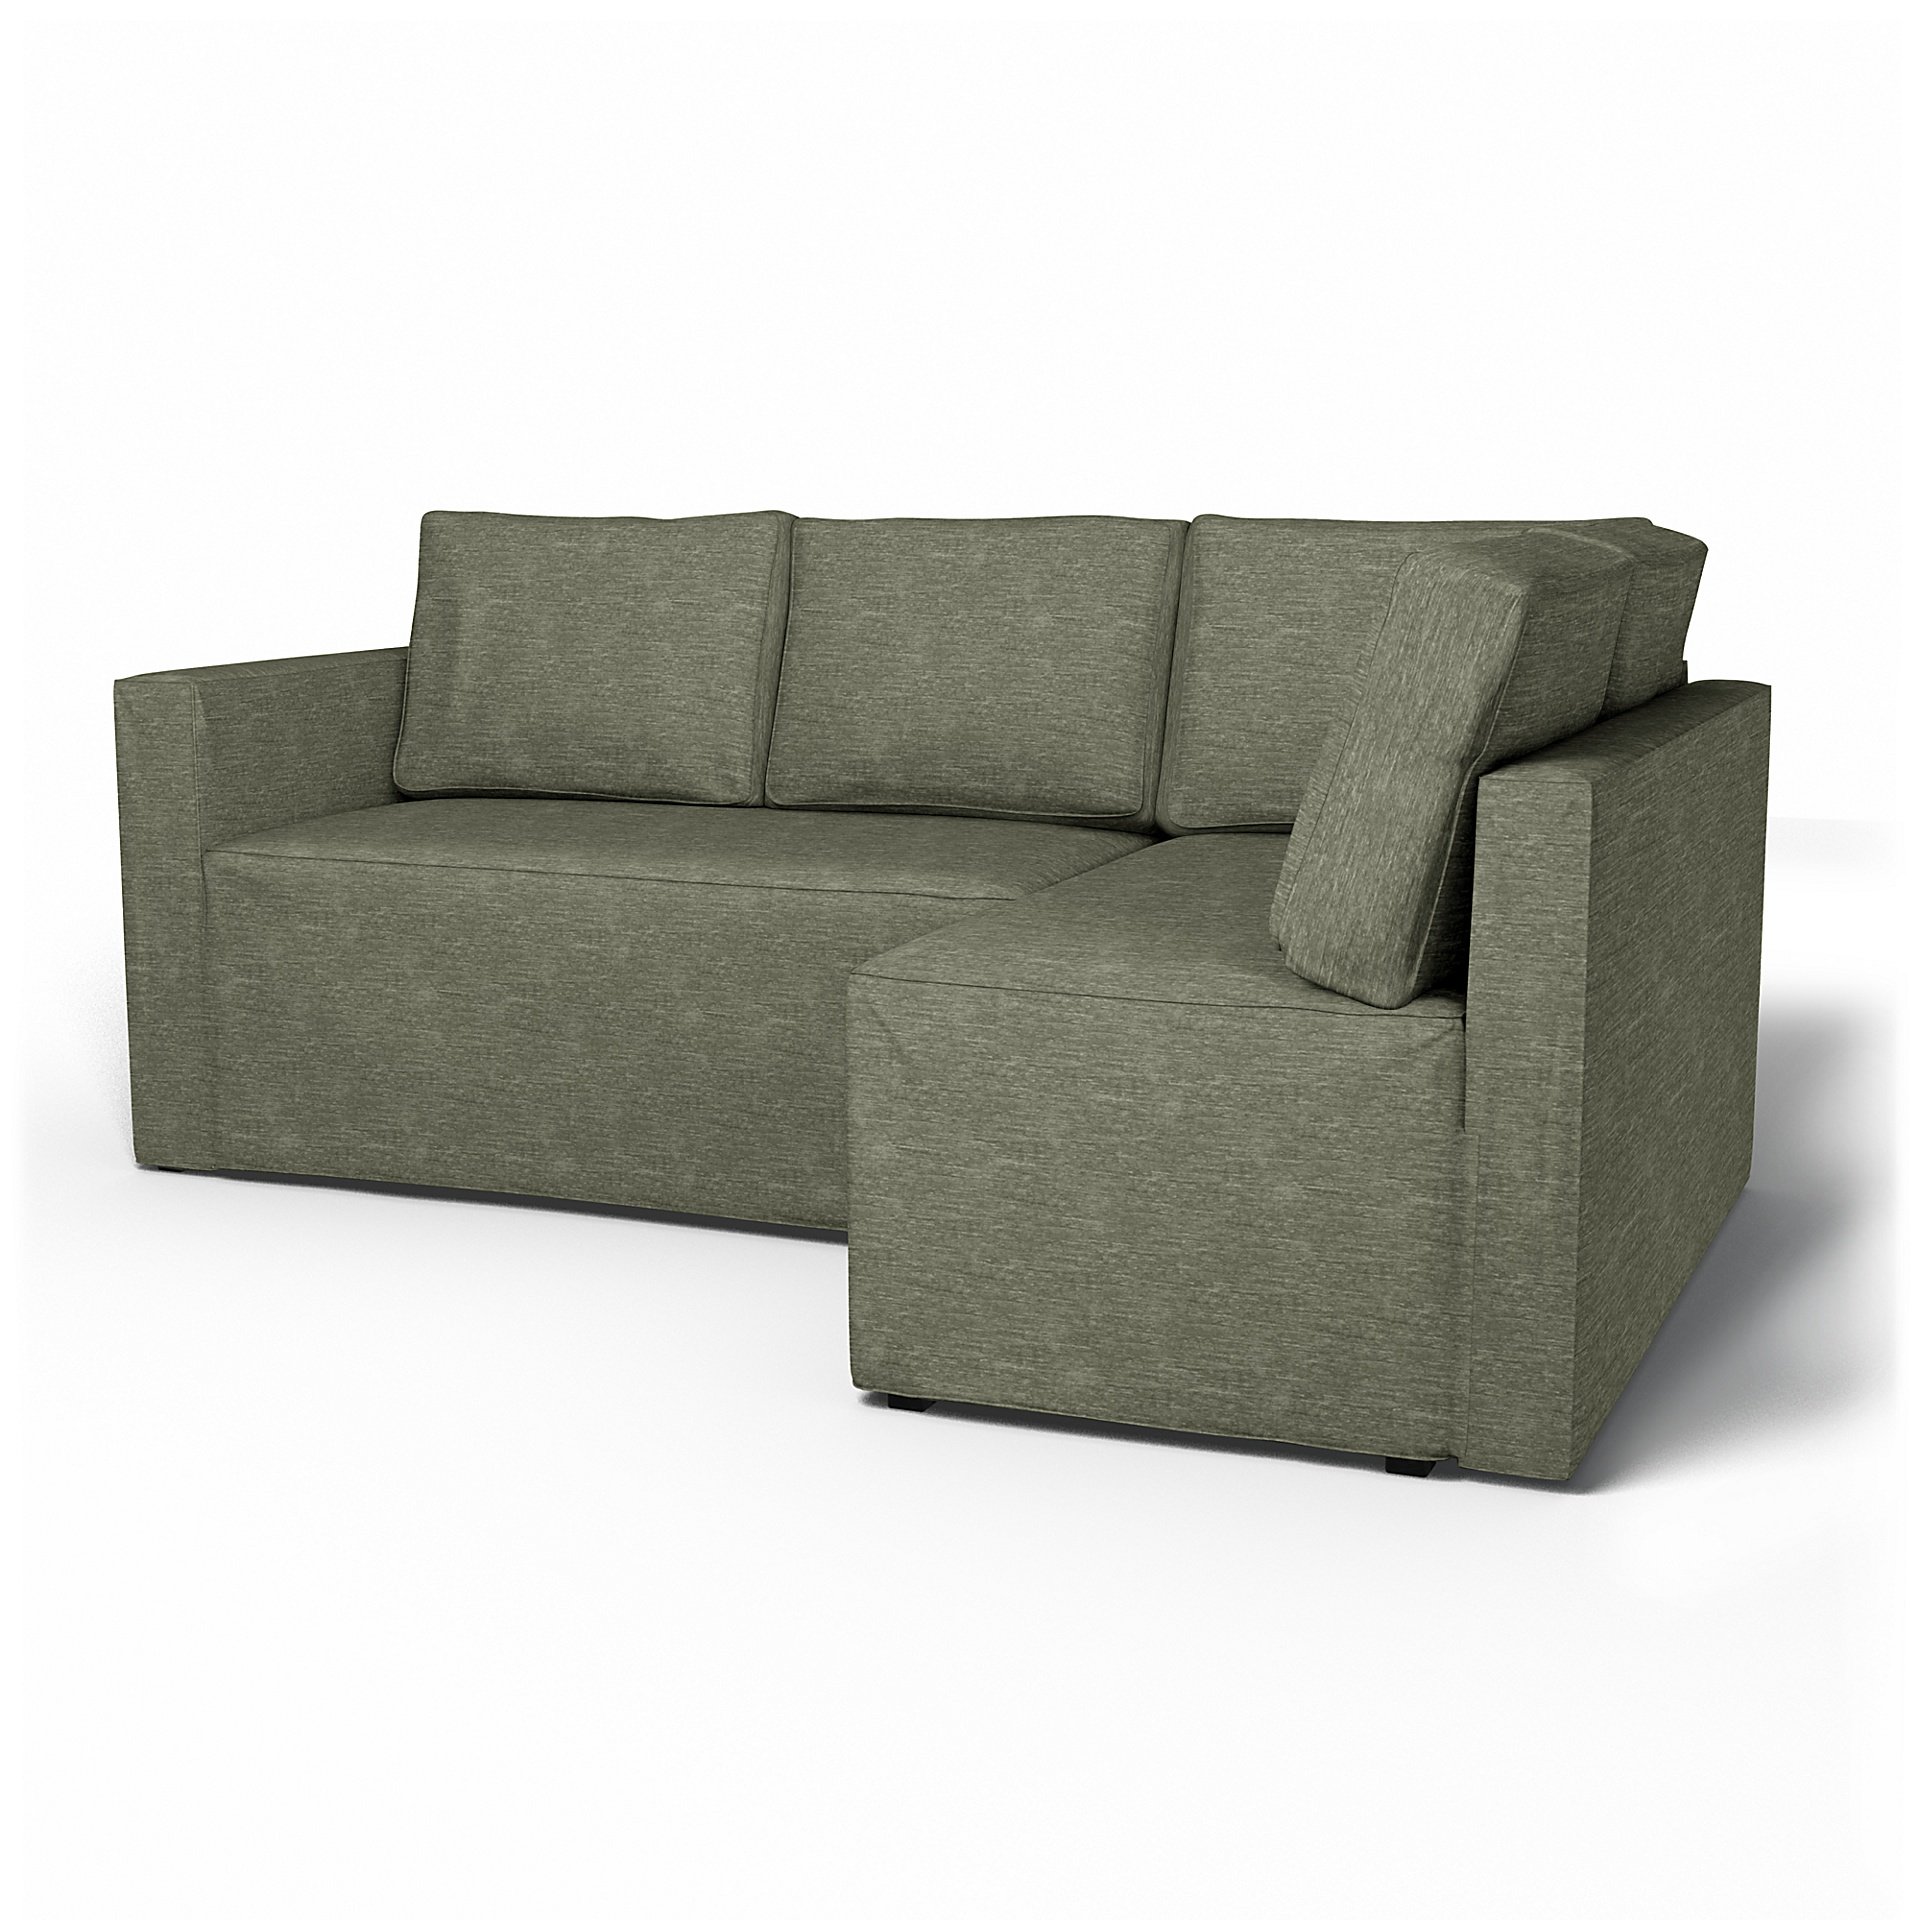 IKEA - Fagelbo Sofa Bed with Right Chaise Cover, Green Grey, Velvet - Bemz